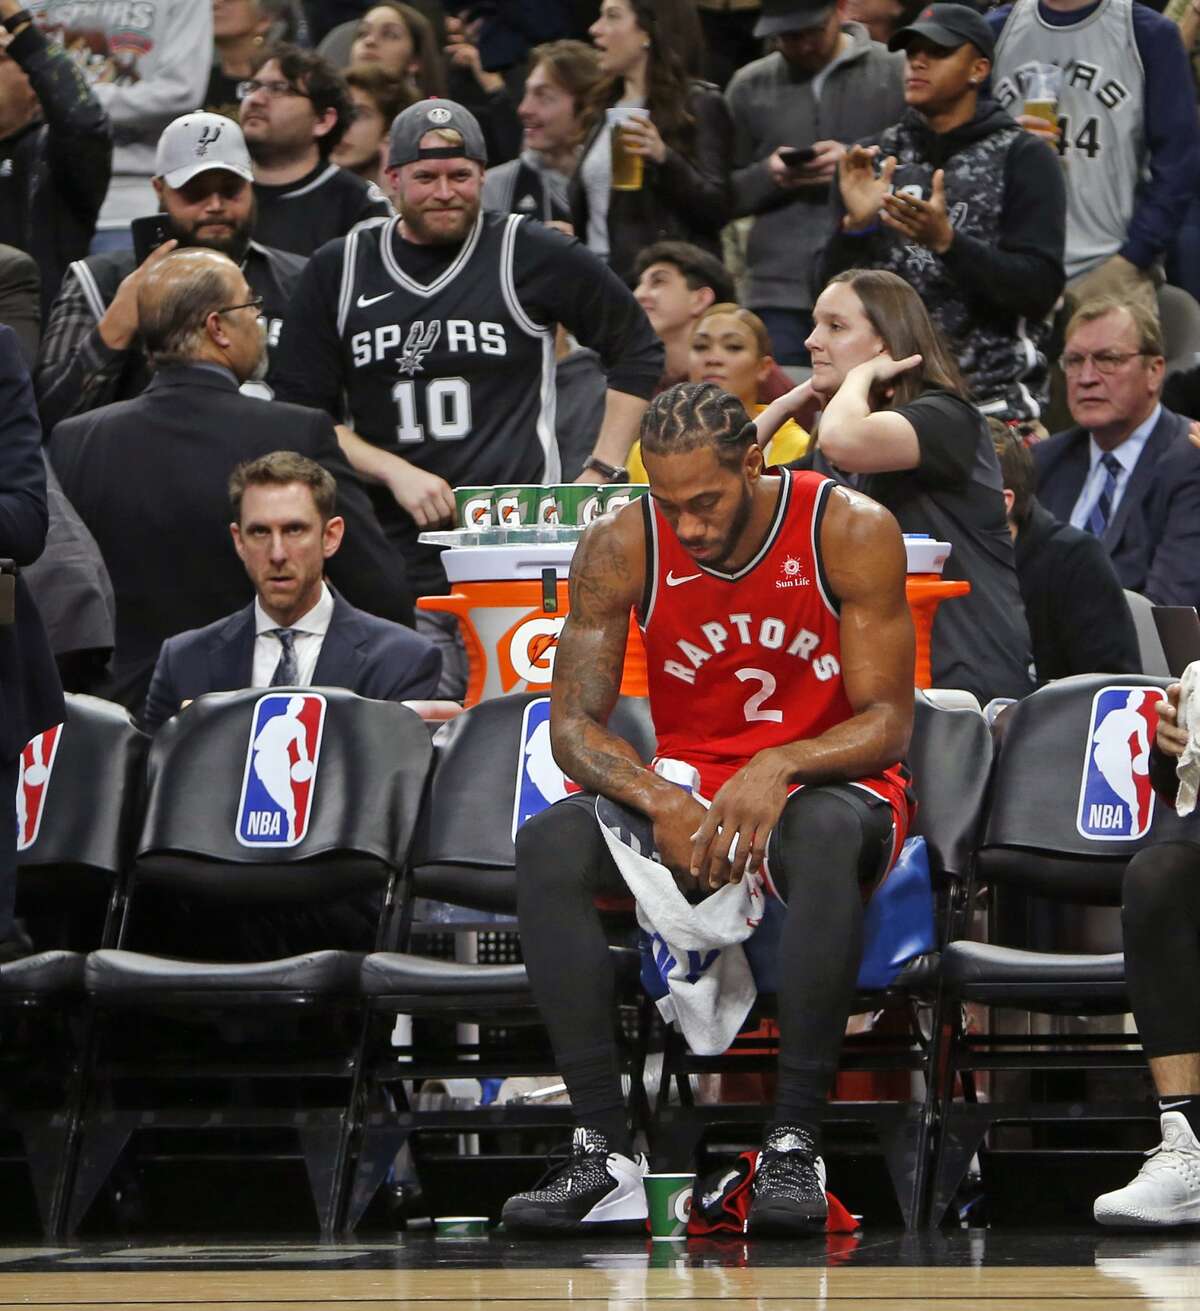 Kawhi Leonard #2 of the Toronto Raptors sits on the bench during a time-out against the San Antonio Spurs at AT&T Center on January 3, 2019 in San Antonio, Texas.